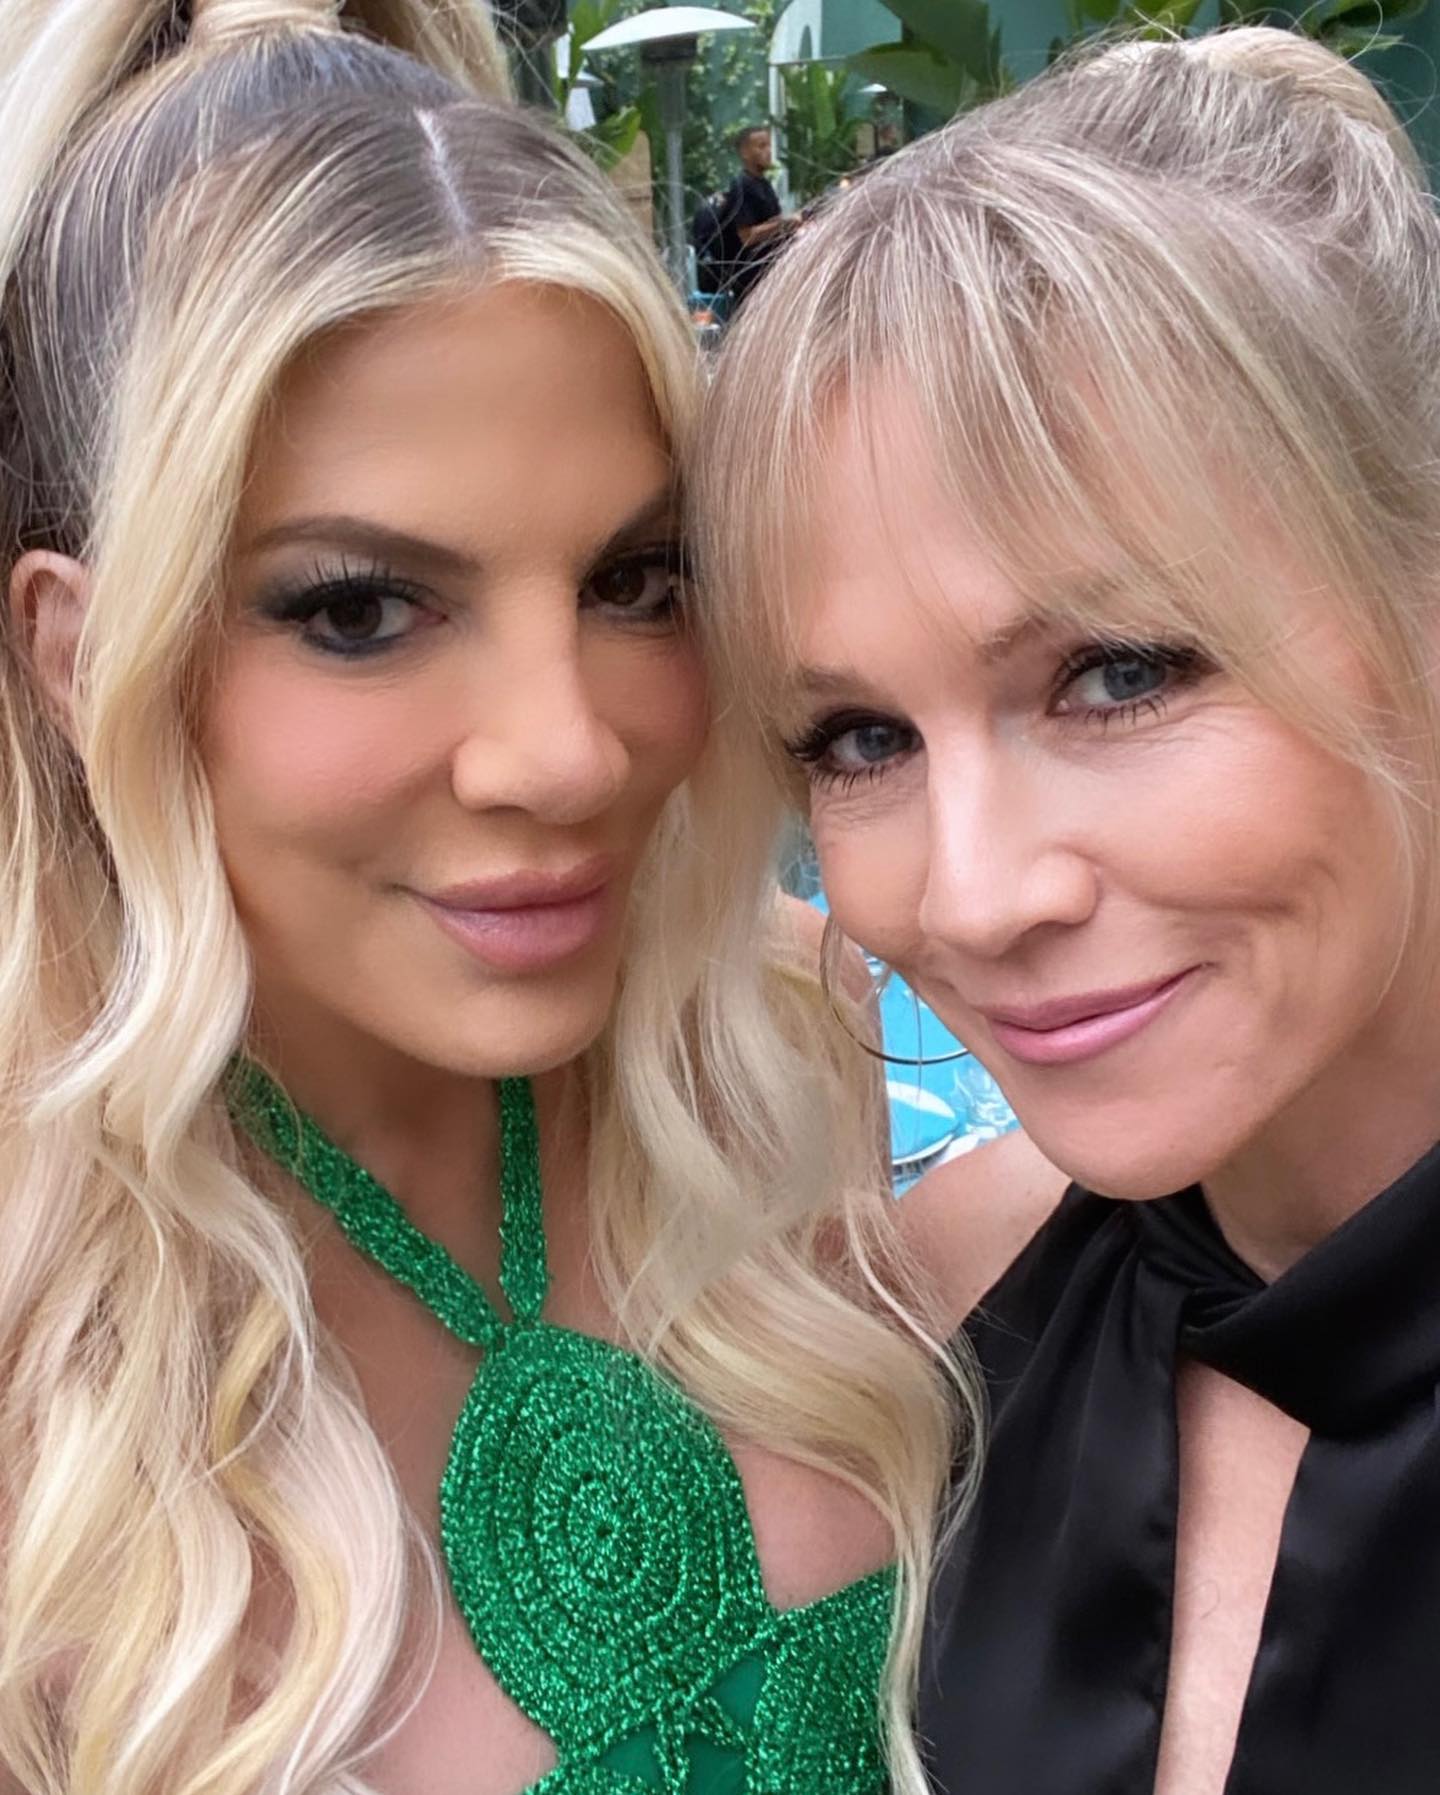 Photo shared by Jennie 💛 on May 16 2023 tagging @torispelling. May be an image of 2 people blonde hair and makeup. 1